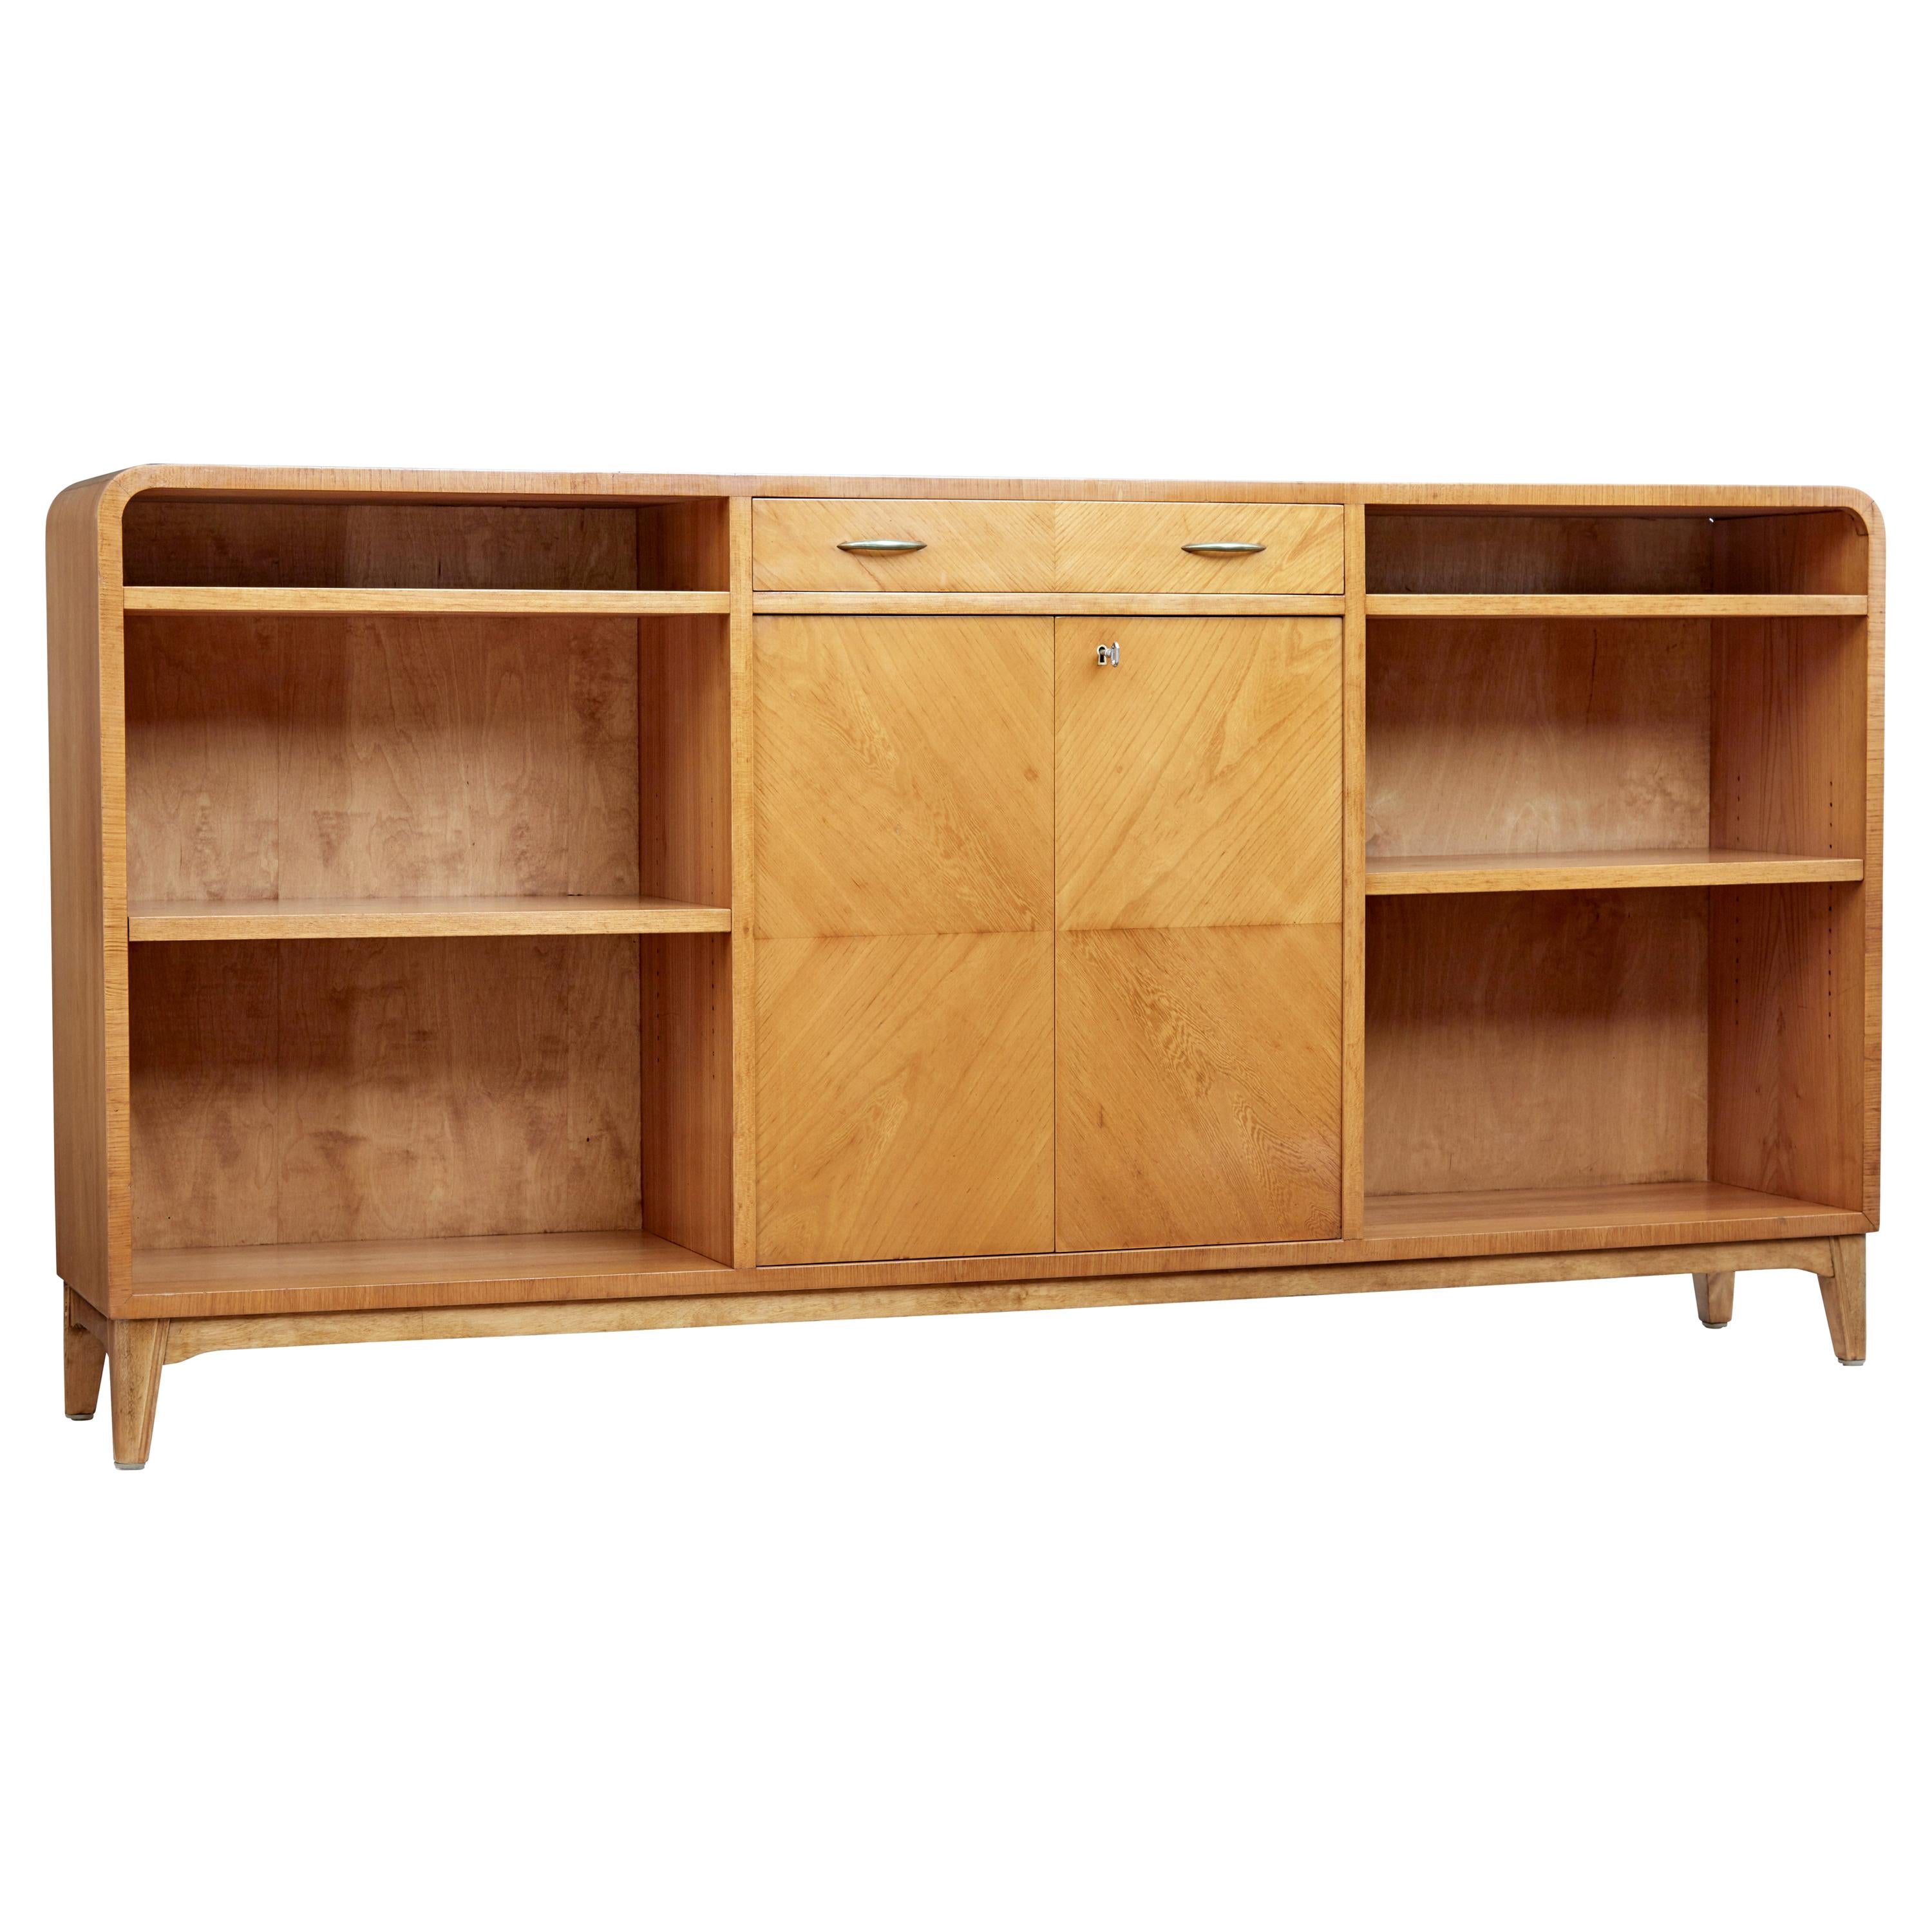 Mid-20th Century Elm Low Open Bookcase by Bodafors